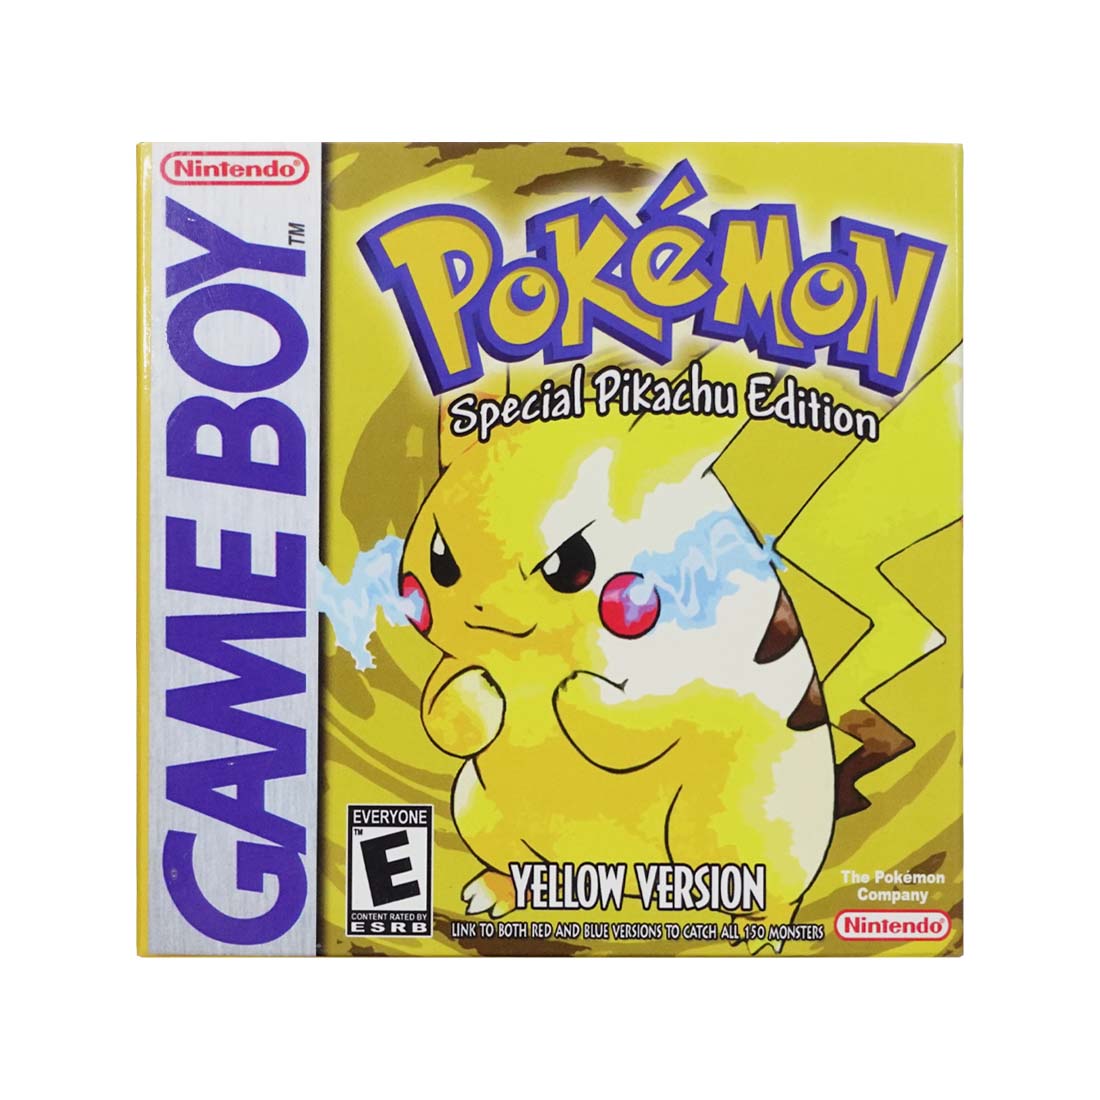 (Pre-Owned) Pokemon Special Pikachu Edition: Yellow Version - Gameboy Classic - لعبة - Store 974 | ستور ٩٧٤